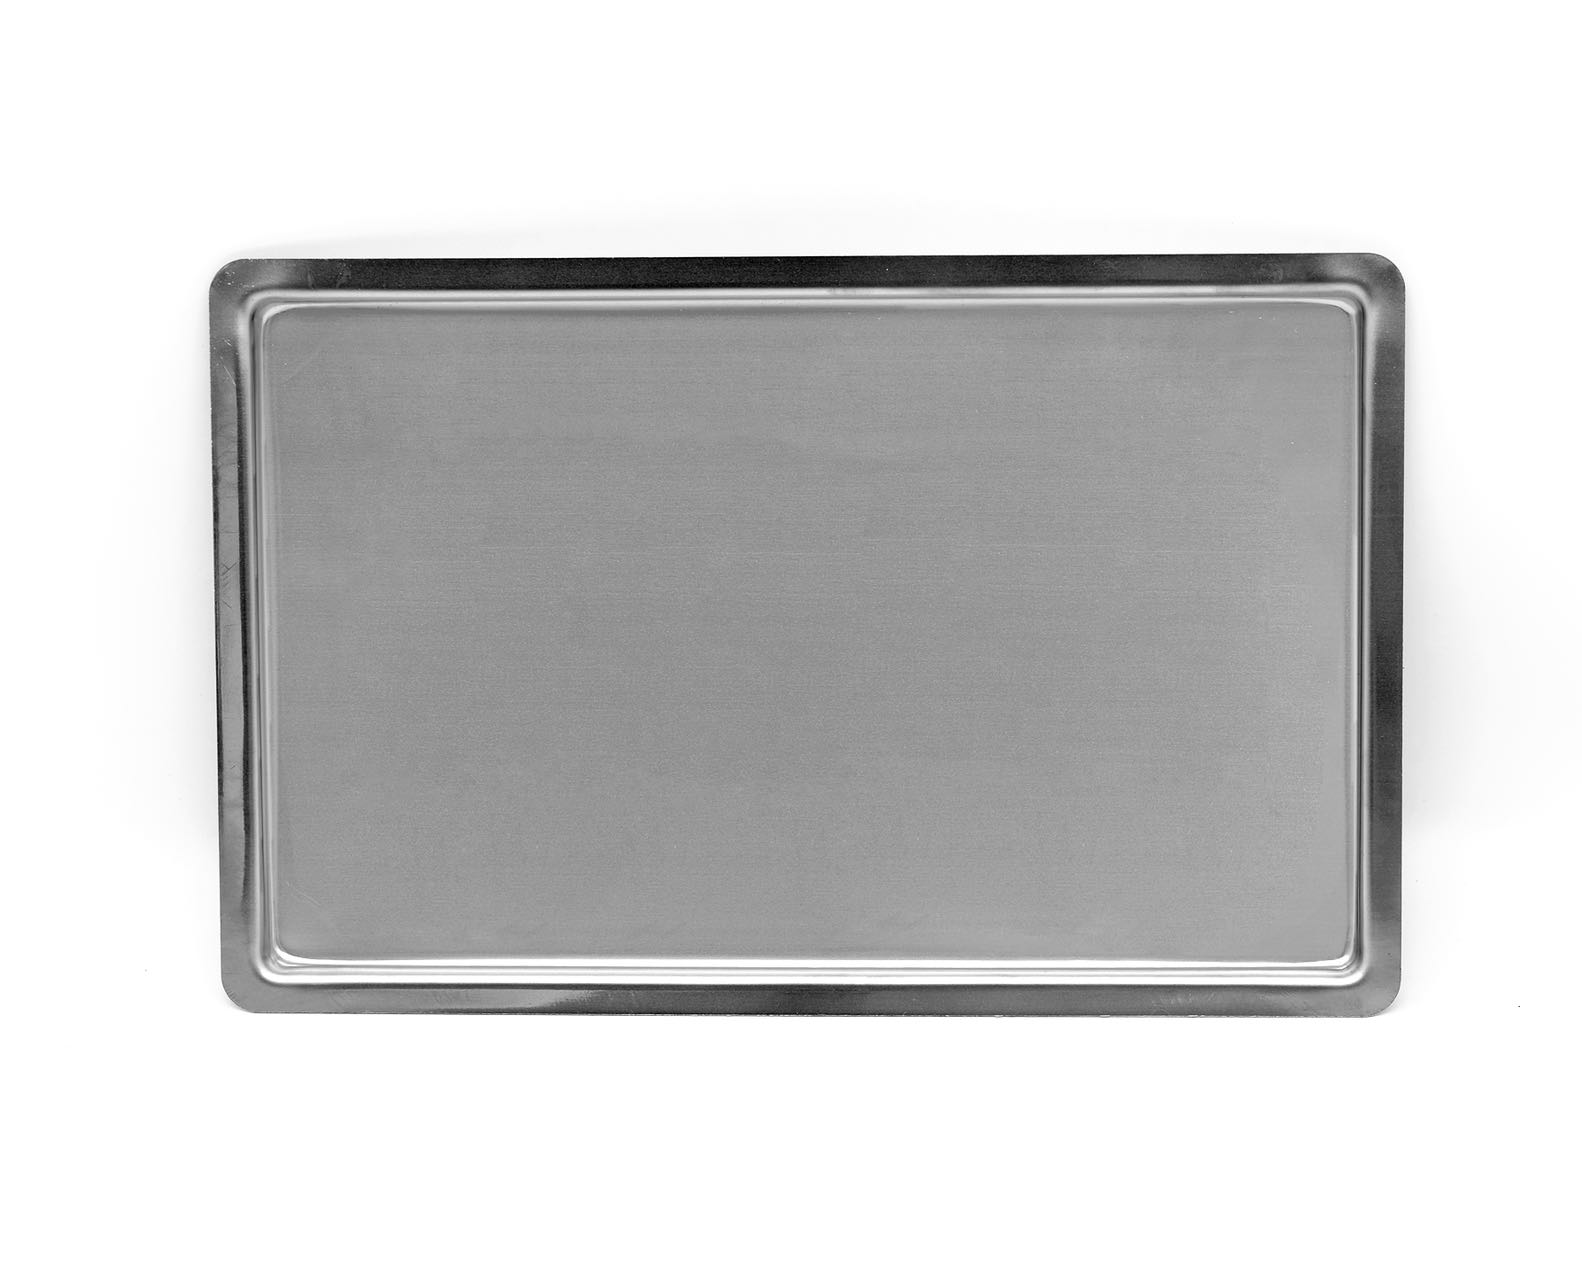 Stainless Steel 30 x 18cm Cooking Plate